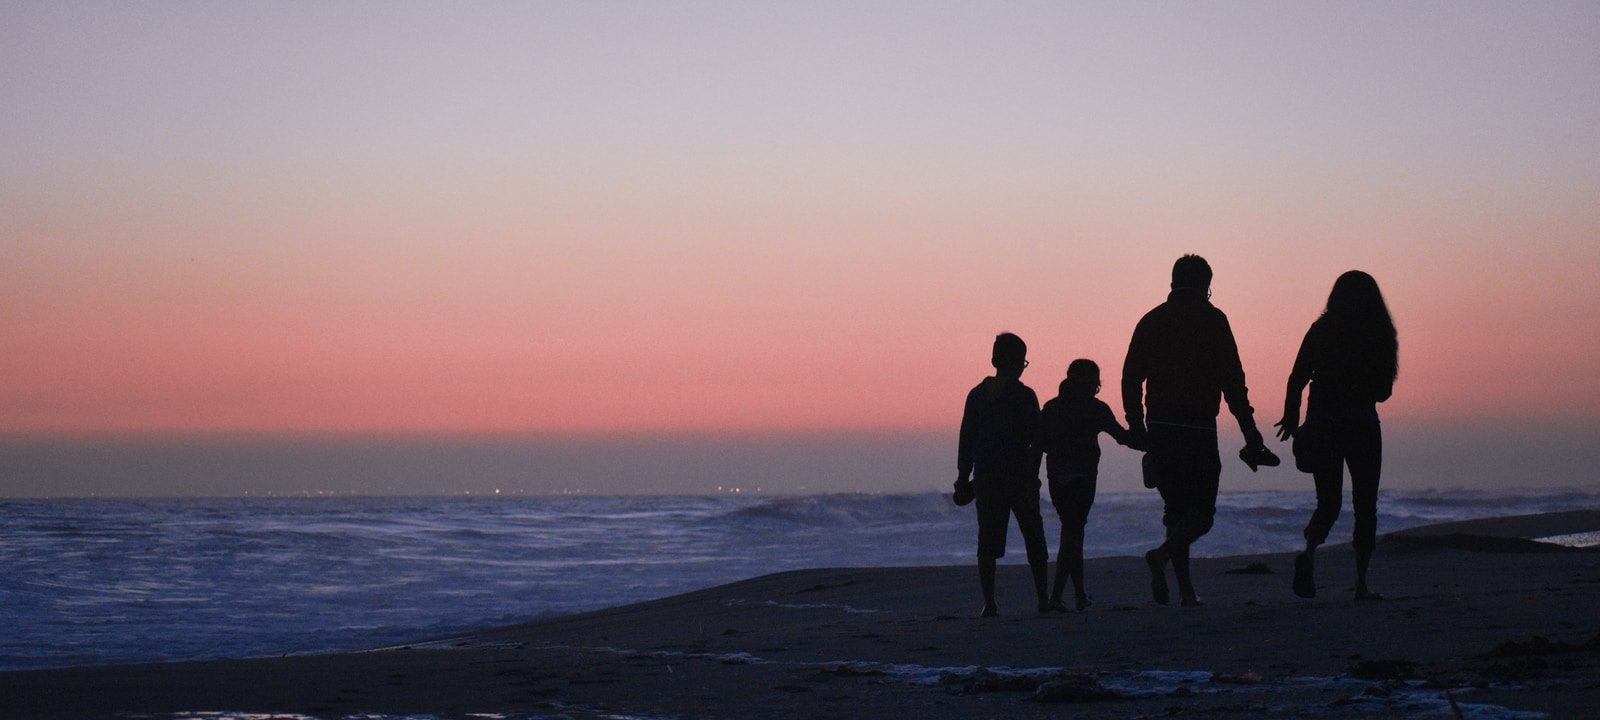 silhouette of 3 men and woman standing on beach during sunset